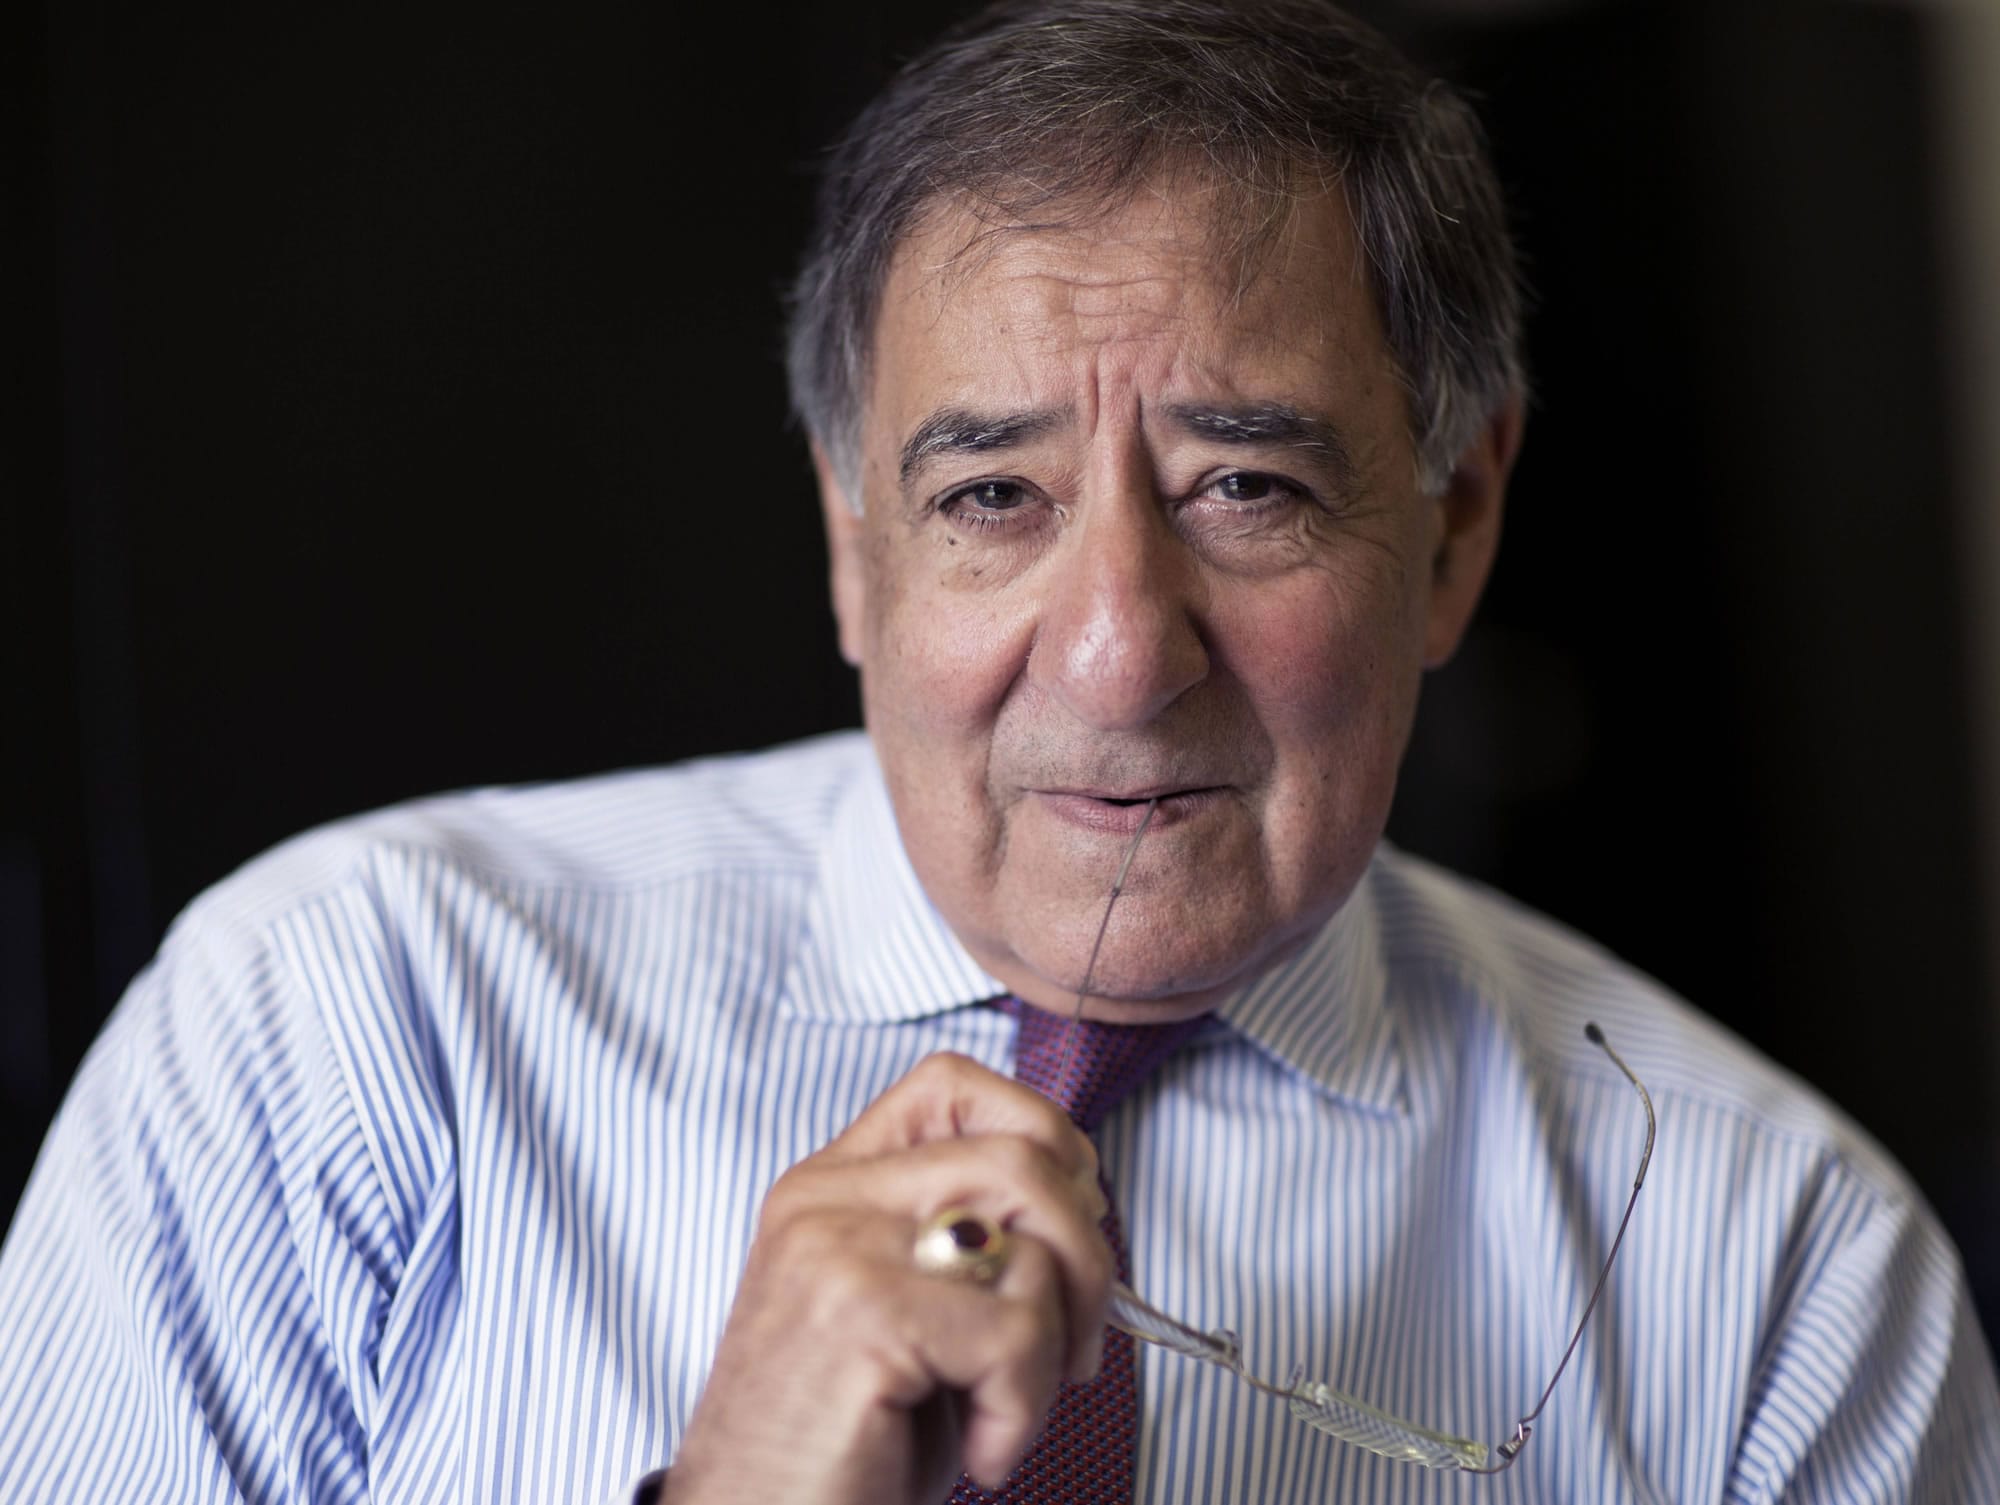 Former CIA Director Leon Panetta poses for a photo for the Showtime documentary &quot;The Spymasters: CIA in the Crosshairs.&quot; (David Hume Kennerly/Showtime)